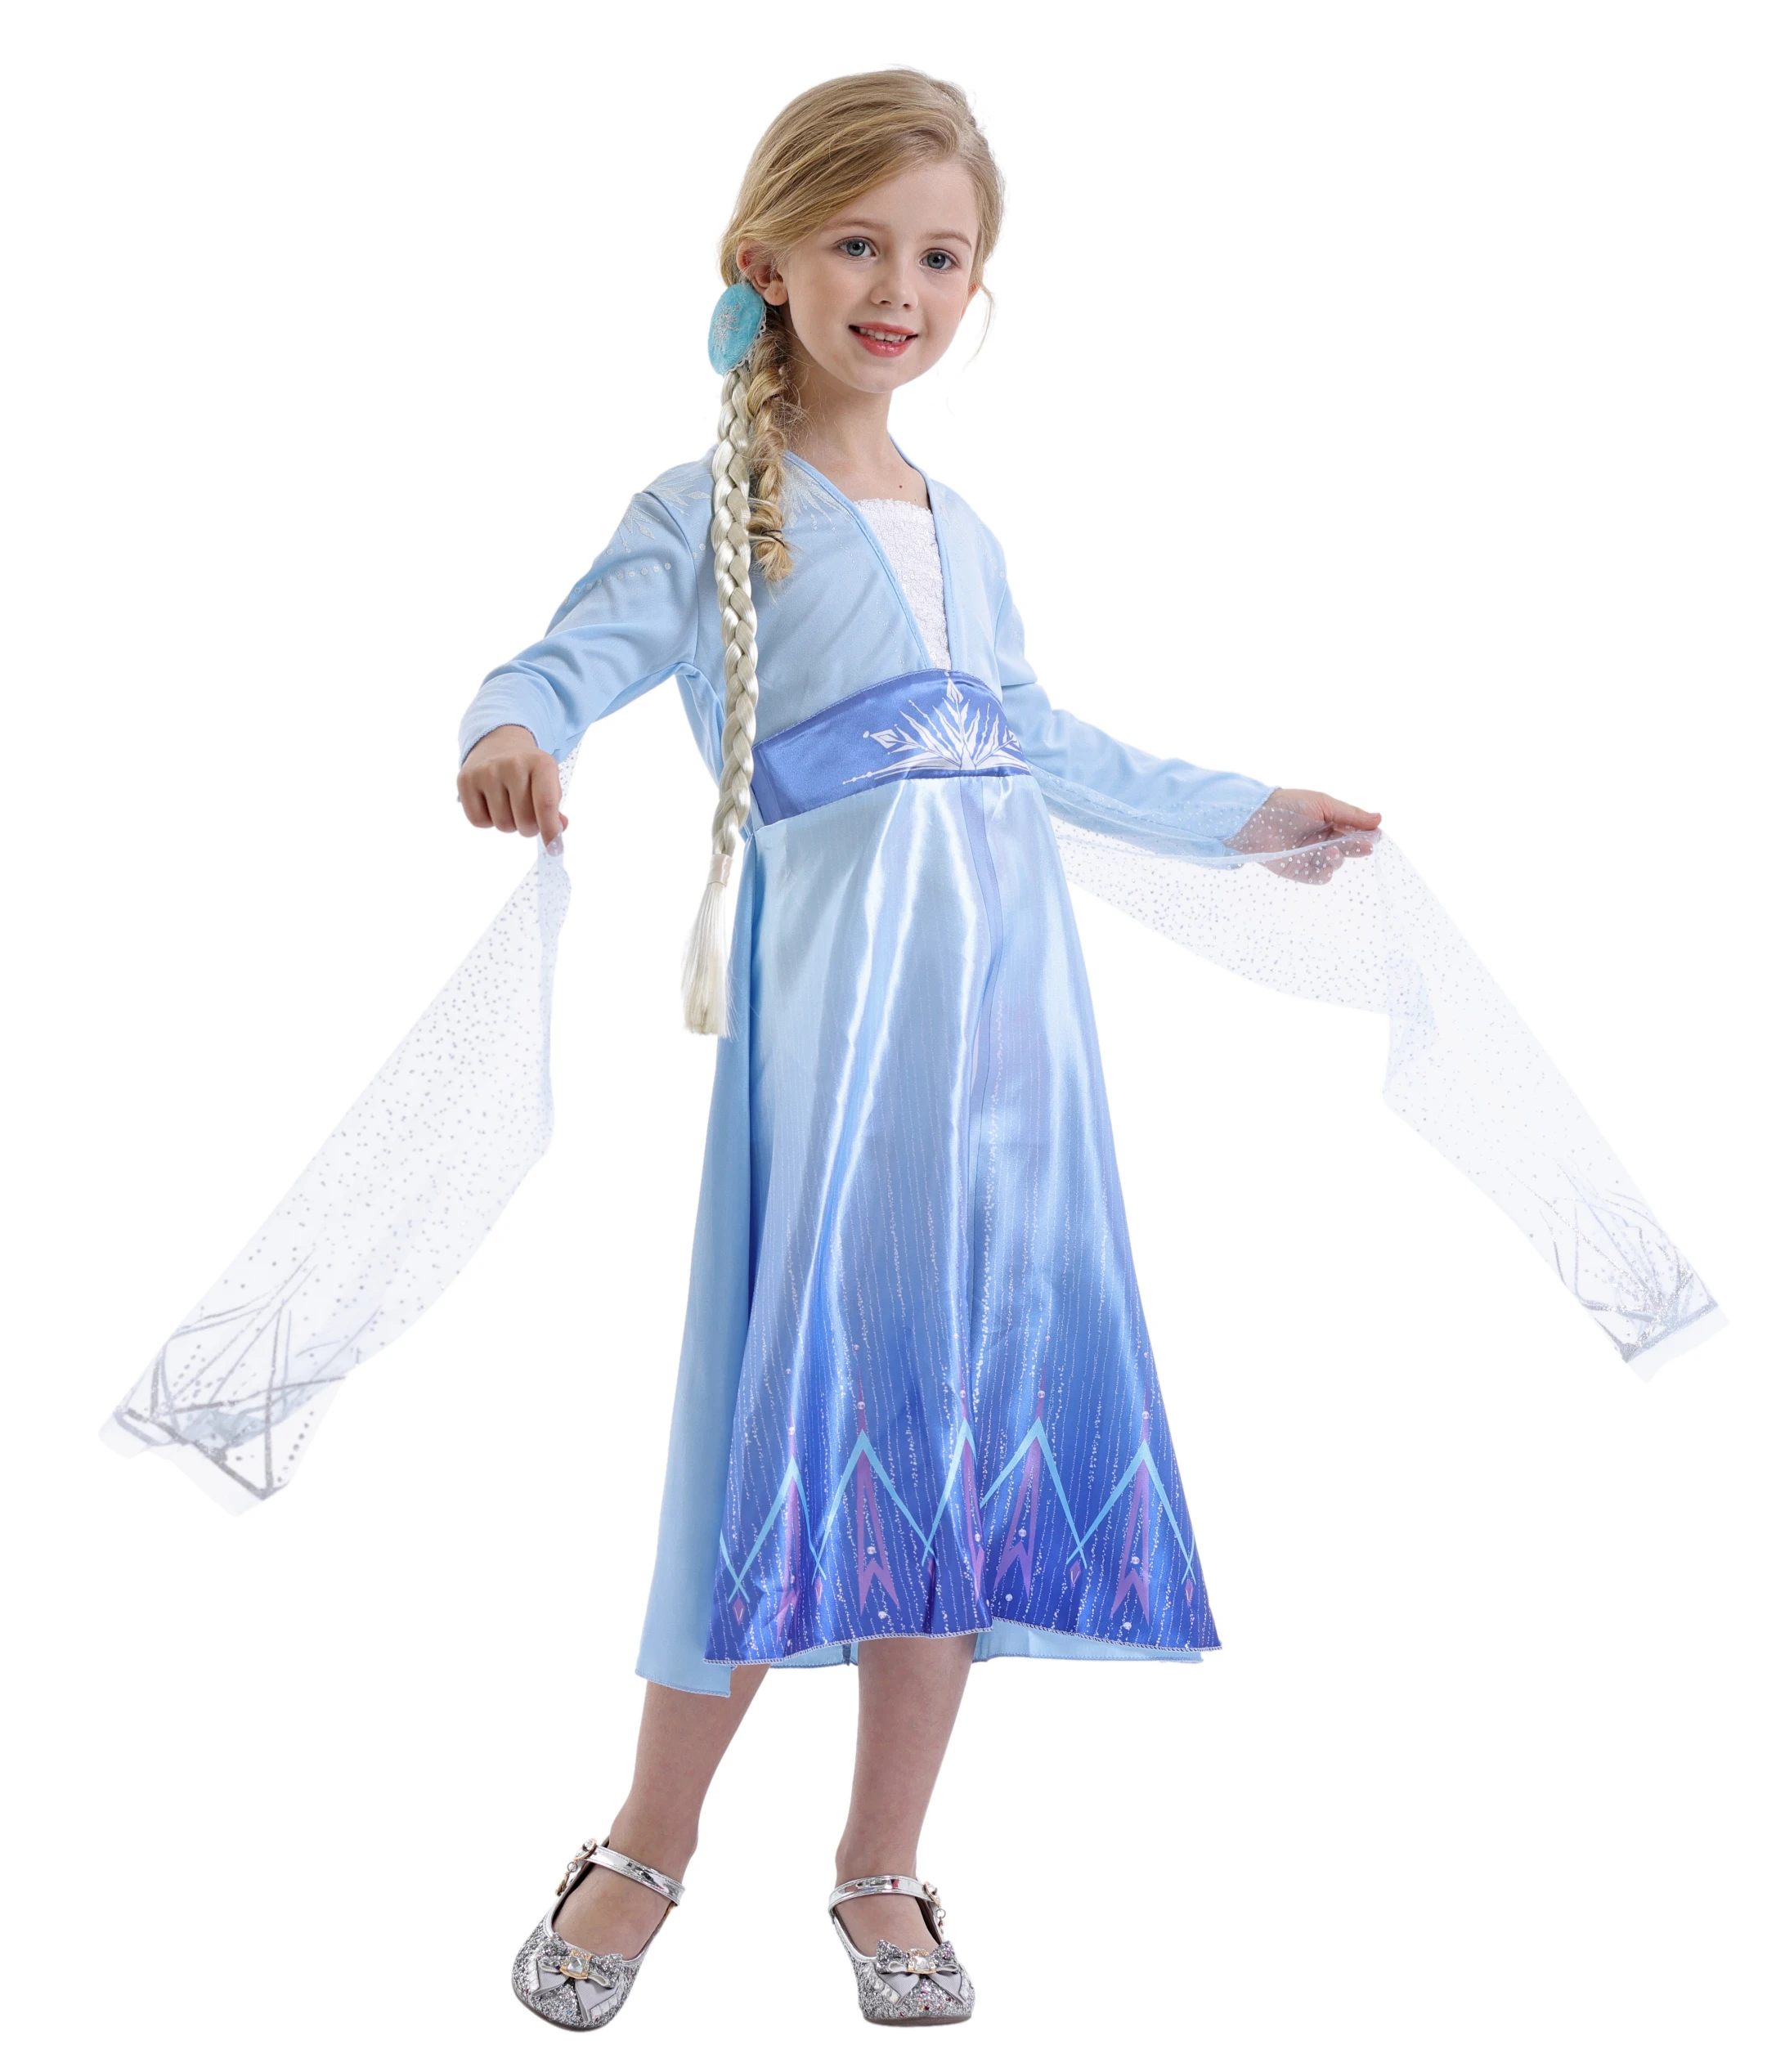 Girls Princess Elsa Costume Snow Queen Halloween Dress Birthday Party Cosplay Outfits 2-8Y 